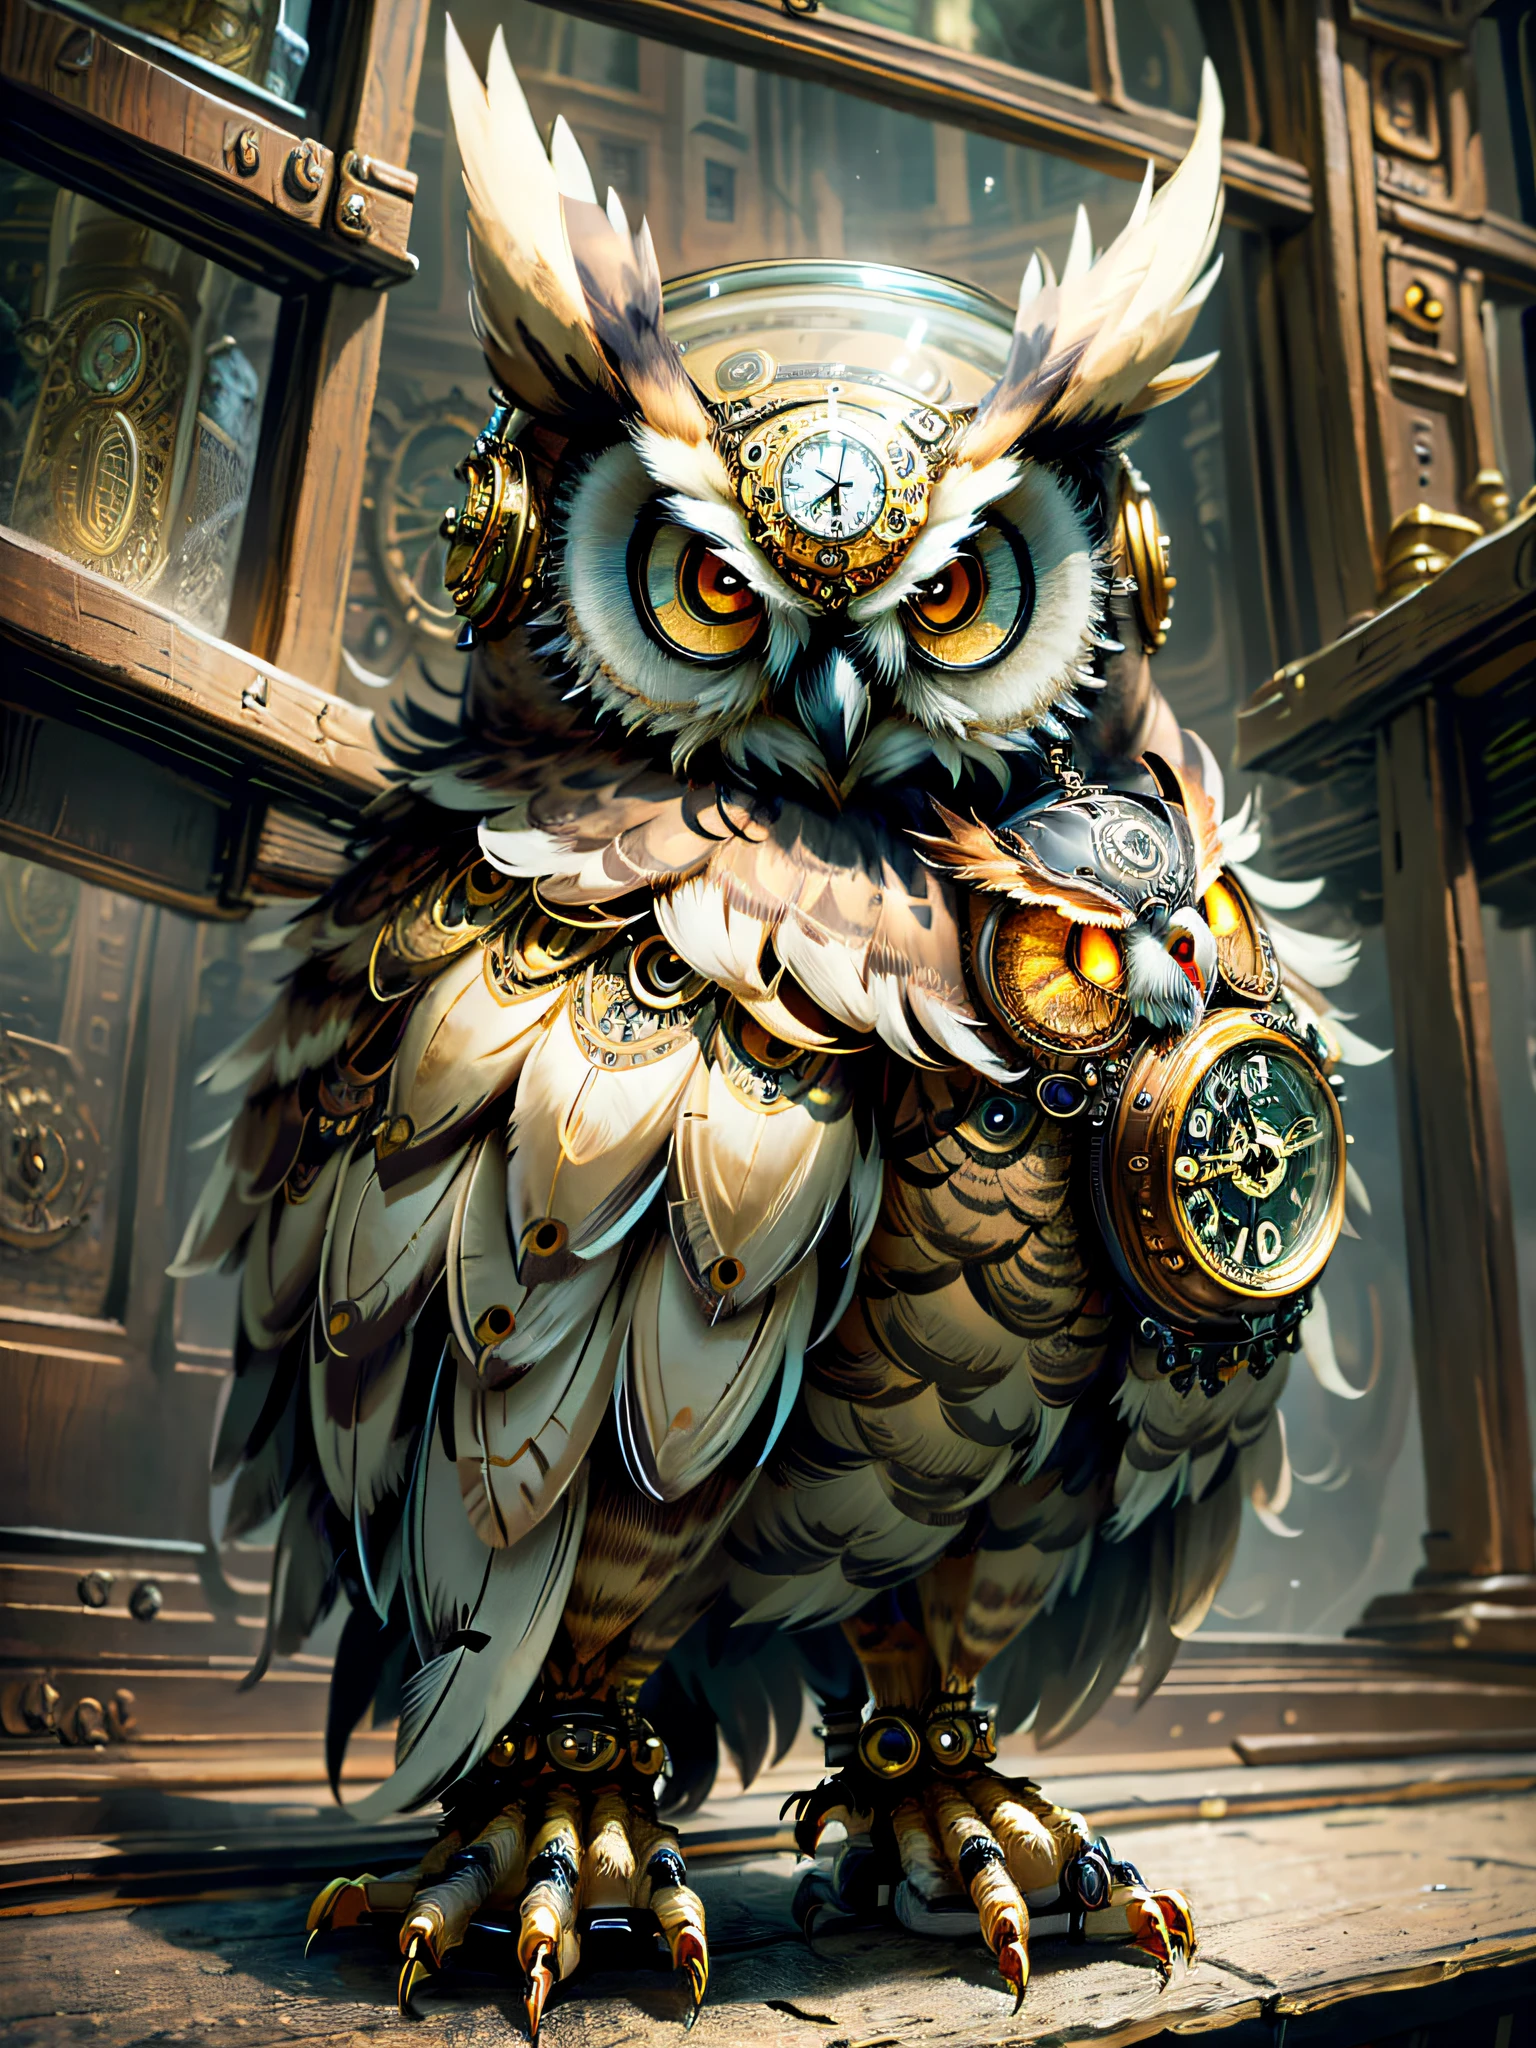 there is a large owl with a clock on its head, mechanical owl, high quality steampunk art, owl wizard, detailed steampunk illustration, 4k highly detailed digital art, steampunk owl inside a glass jar, high detailed official artwork, steampunk owl pocketwatch, hearthstone card game artwork. ”, steampunk illustration, nite - owl, digital steampunk art, radiant owl, steampunk art